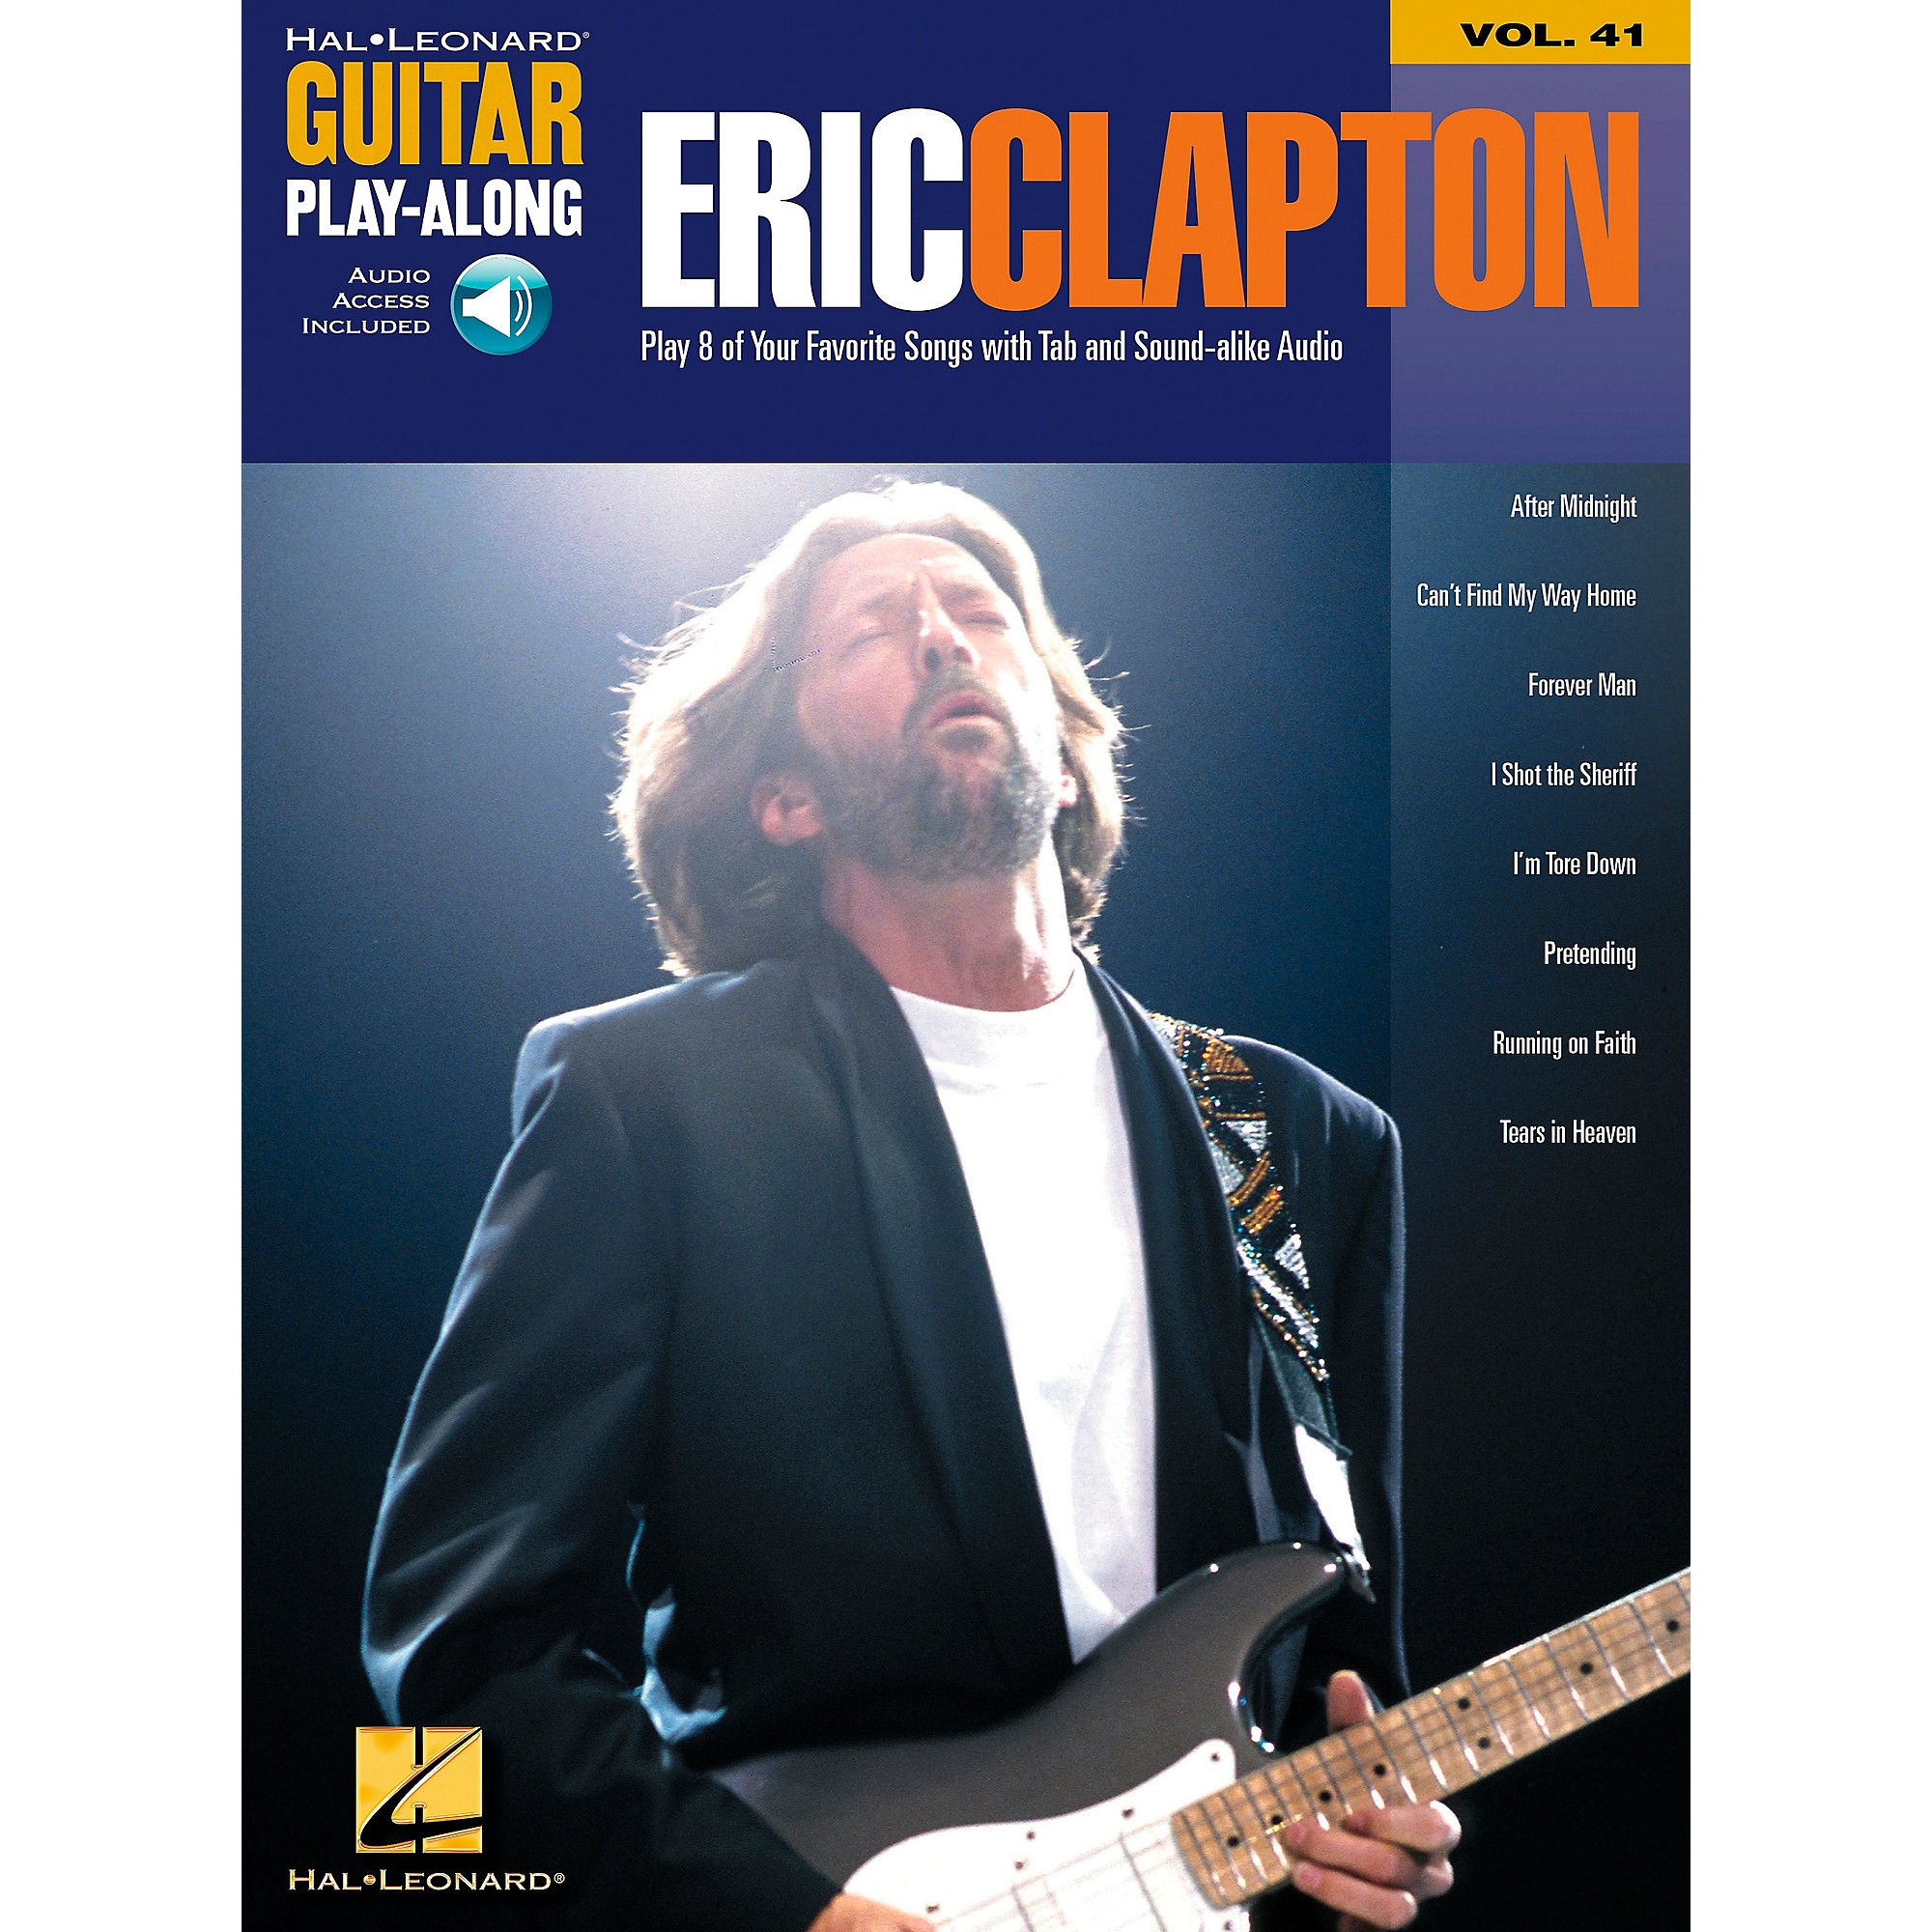 Tears in Heaven Tab by Eric Clapton (Guitar Pro) - Guitars, Bass &  Backing Track